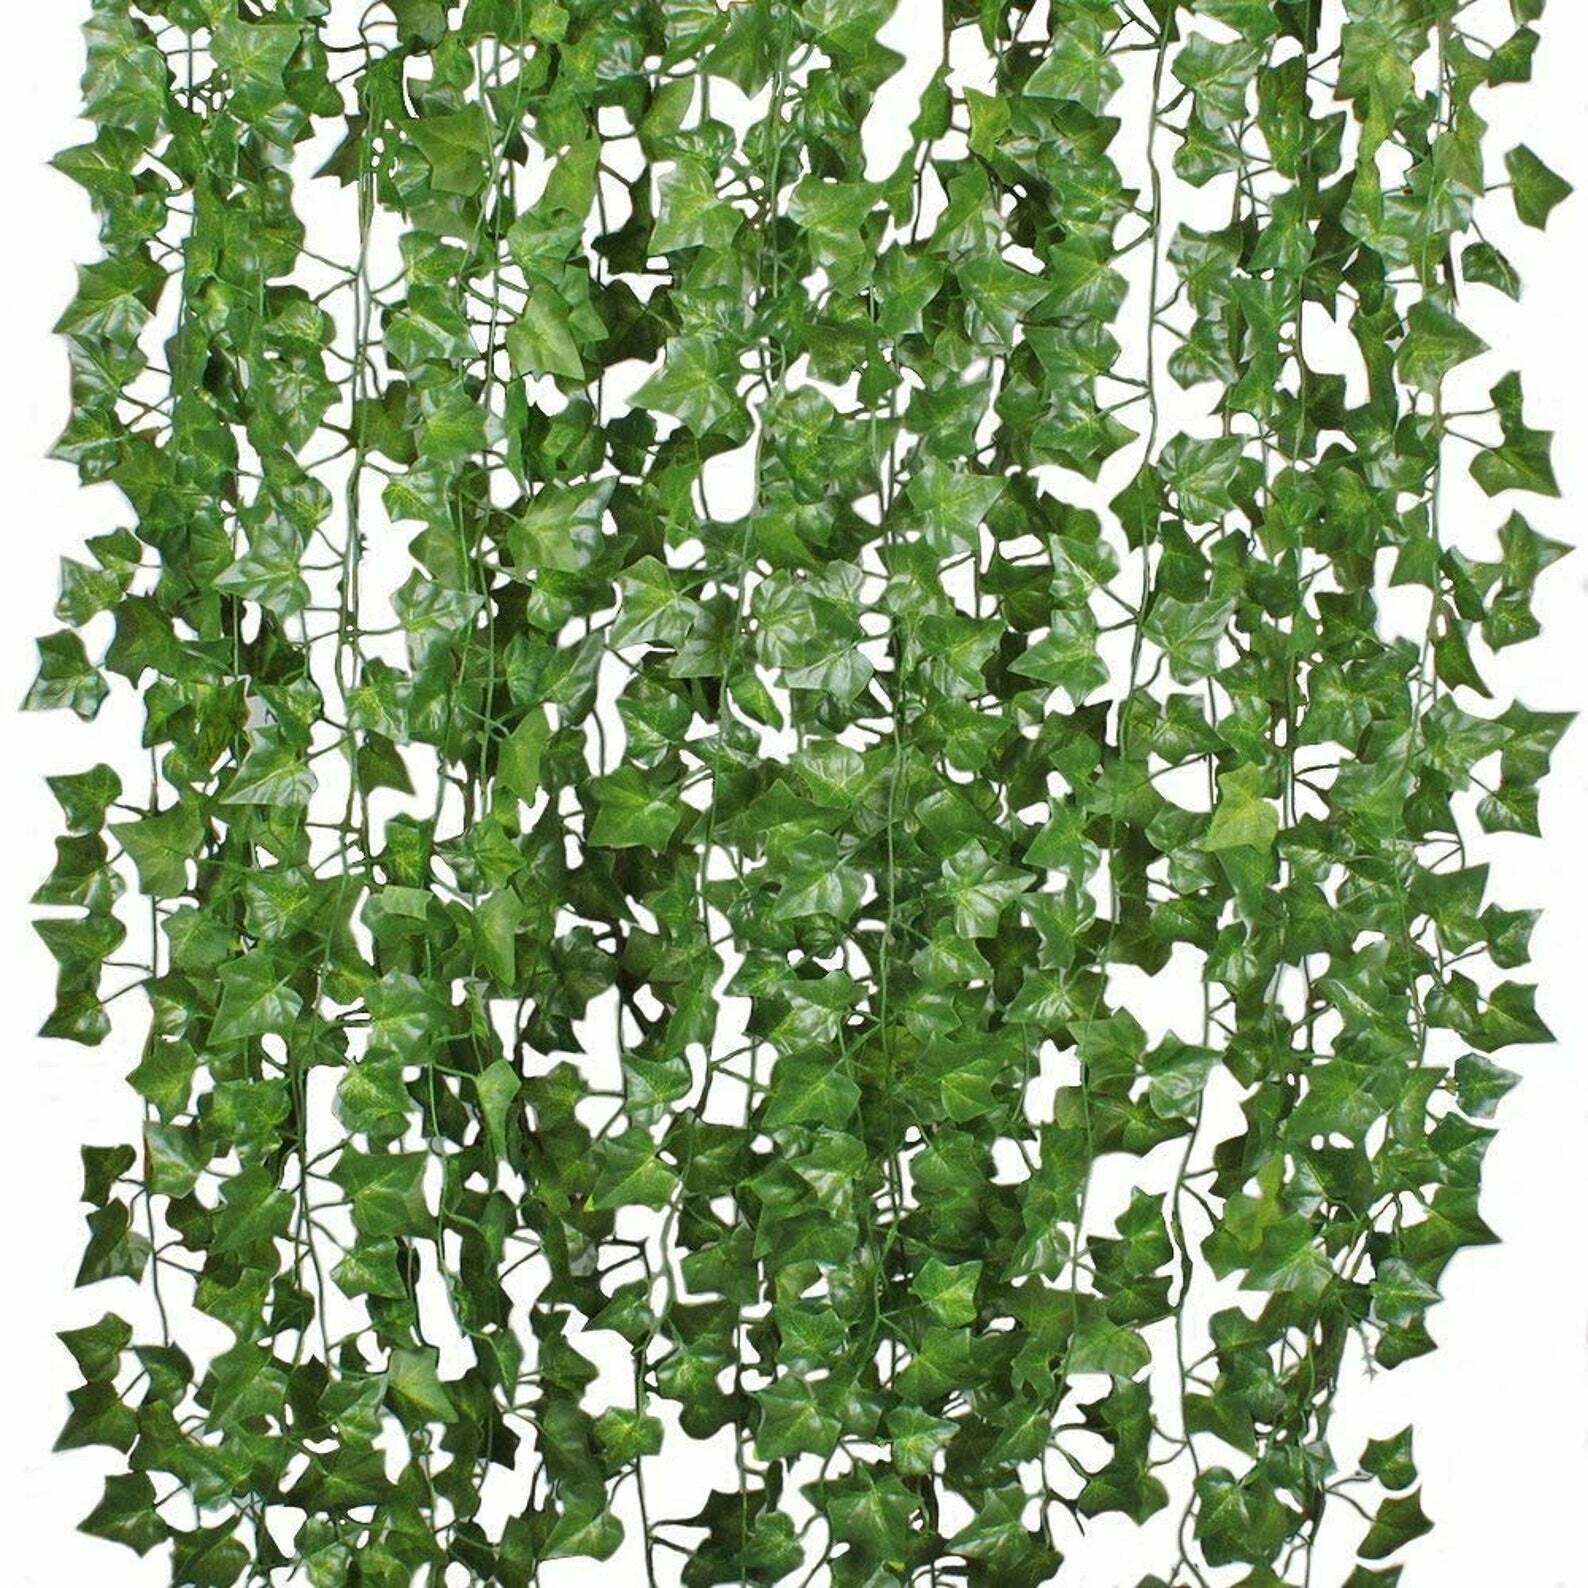 Fake Ivy Leaves 6pk., Artificial Greenery Vines For Decor, Room Decor Garland